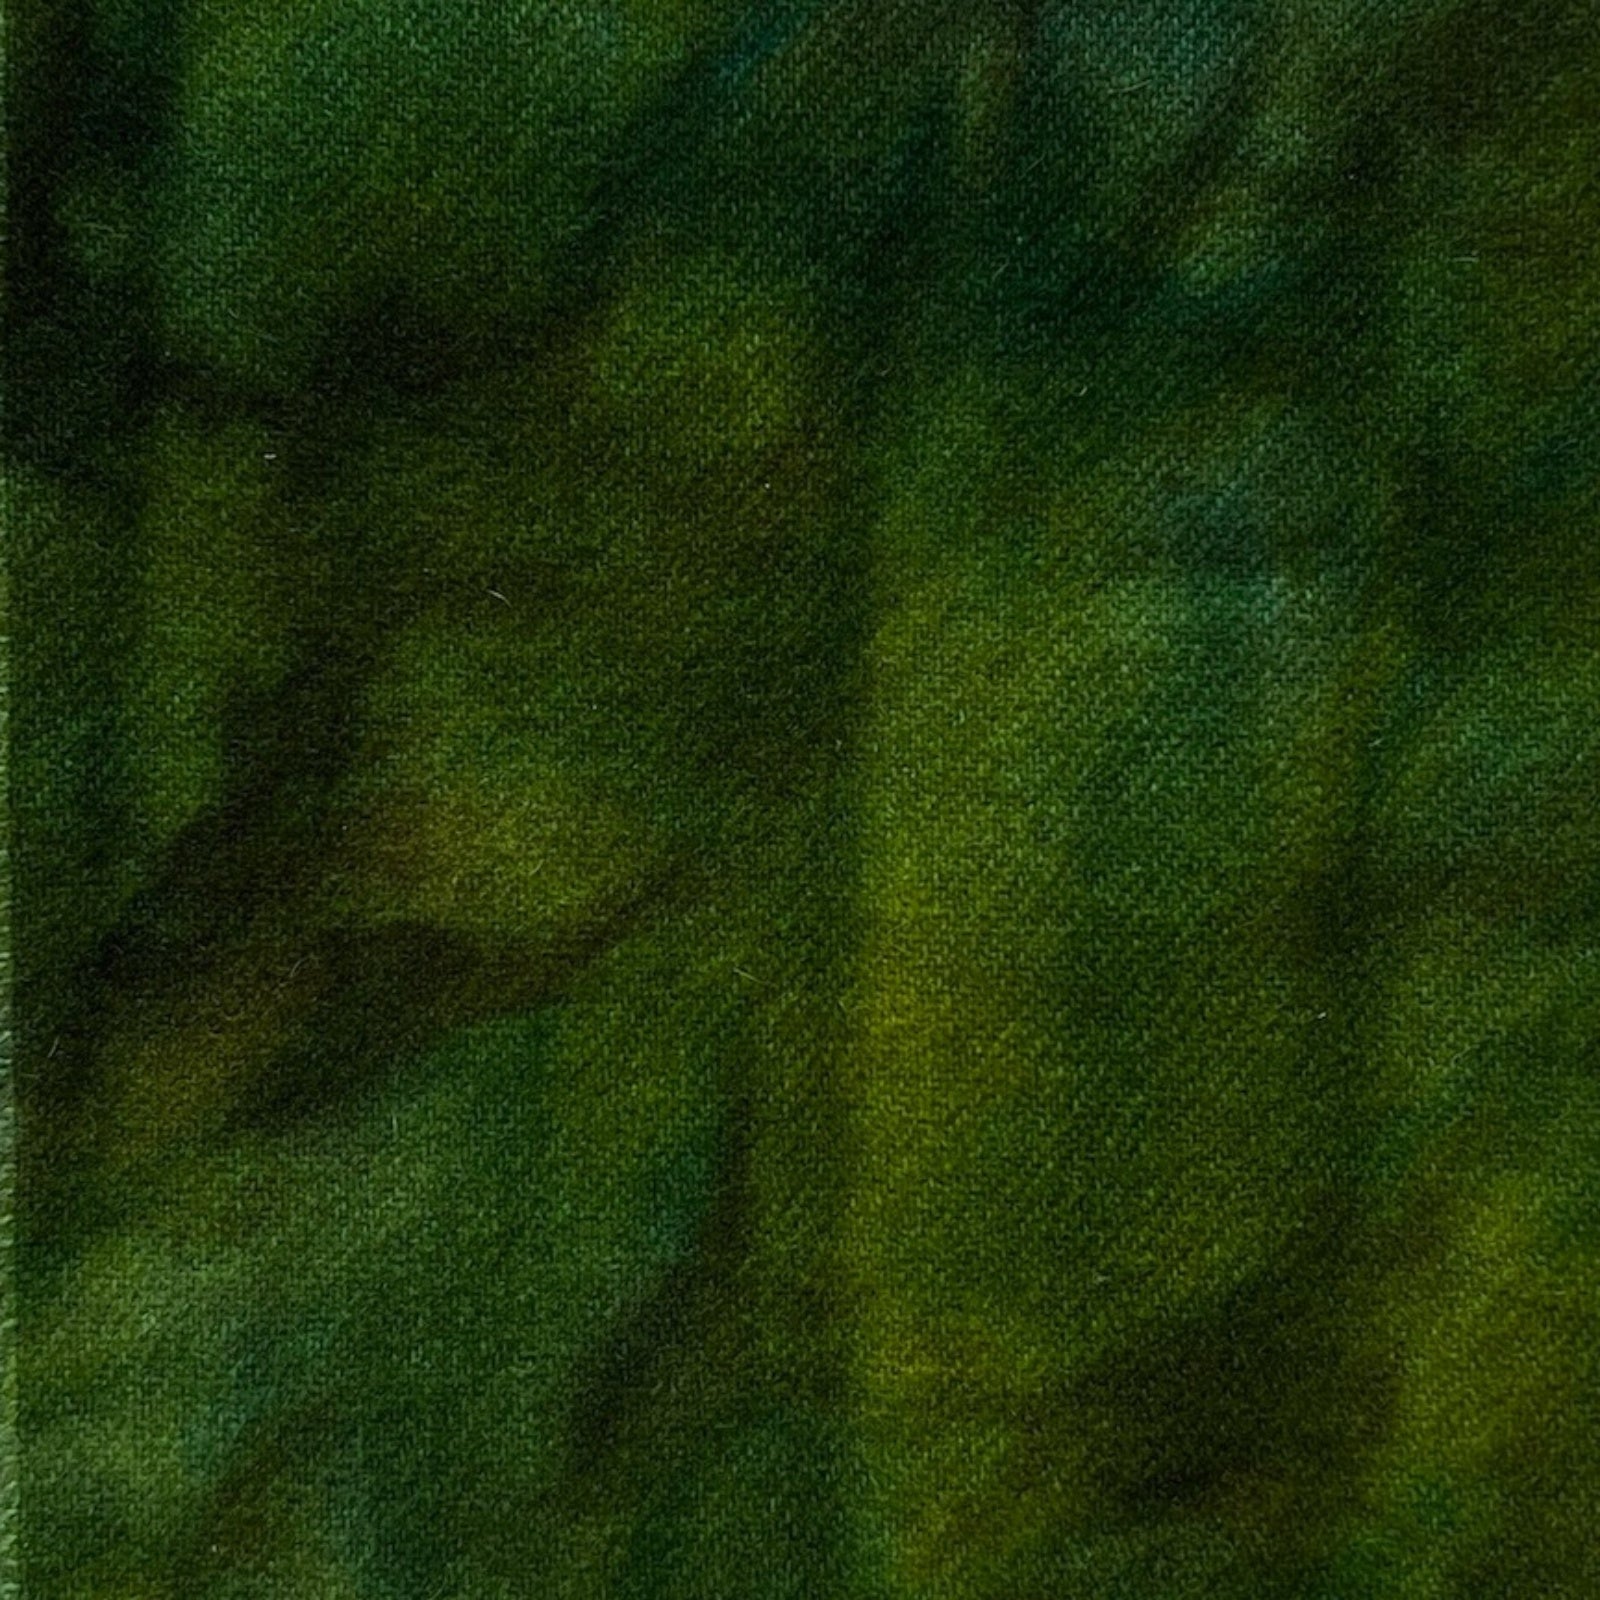 Jolly Green Giant - Colorama Hand Dyed Wool - Offered by HoneyBee Hive Rug Hooking